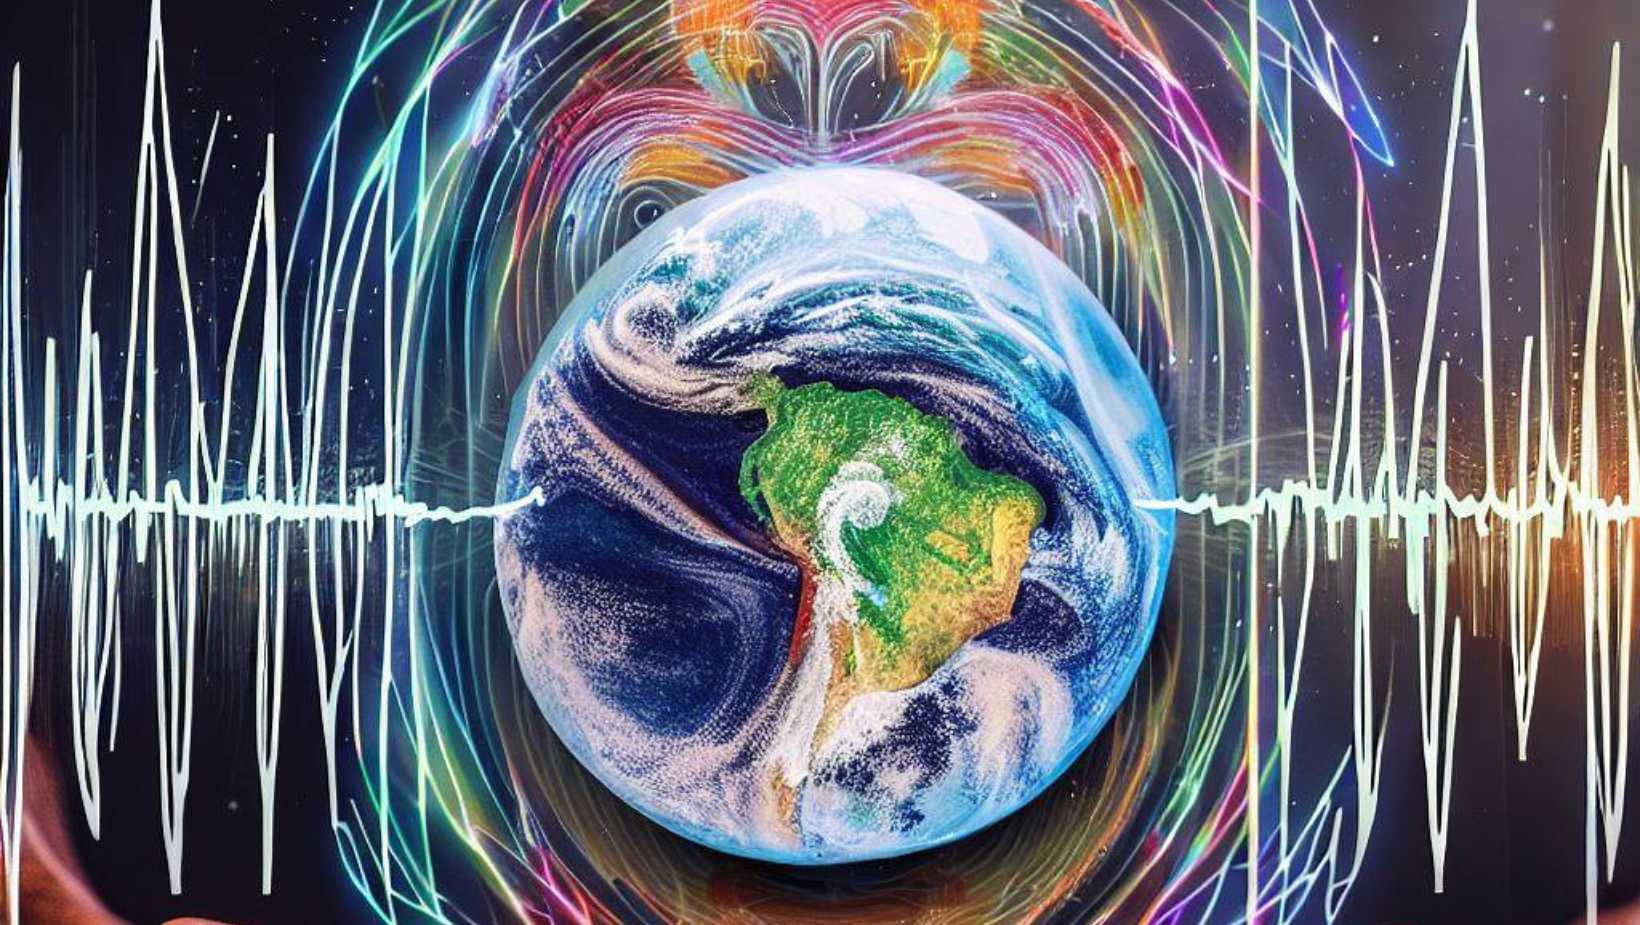 Bing AI Image created by Marnie Pehrson Kuhns with the prompt: Create a piece of art that depicts how the magnetic resonances of the earth sync up with the human heart rhythms and creates a global field that connects all living things with the earth.